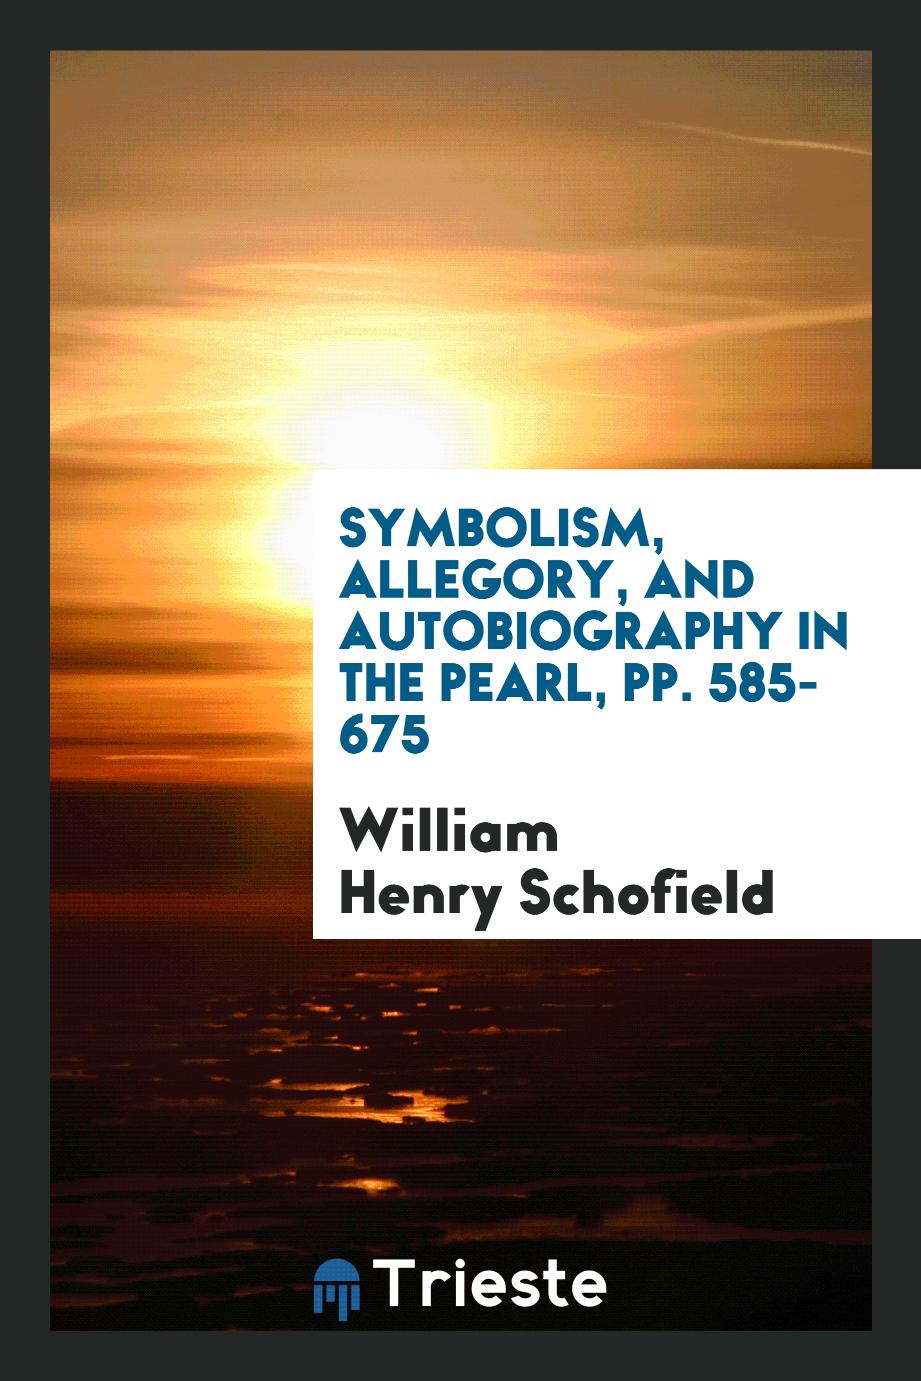 Symbolism, Allegory, and Autobiography in The Pearl, pp. 585-675